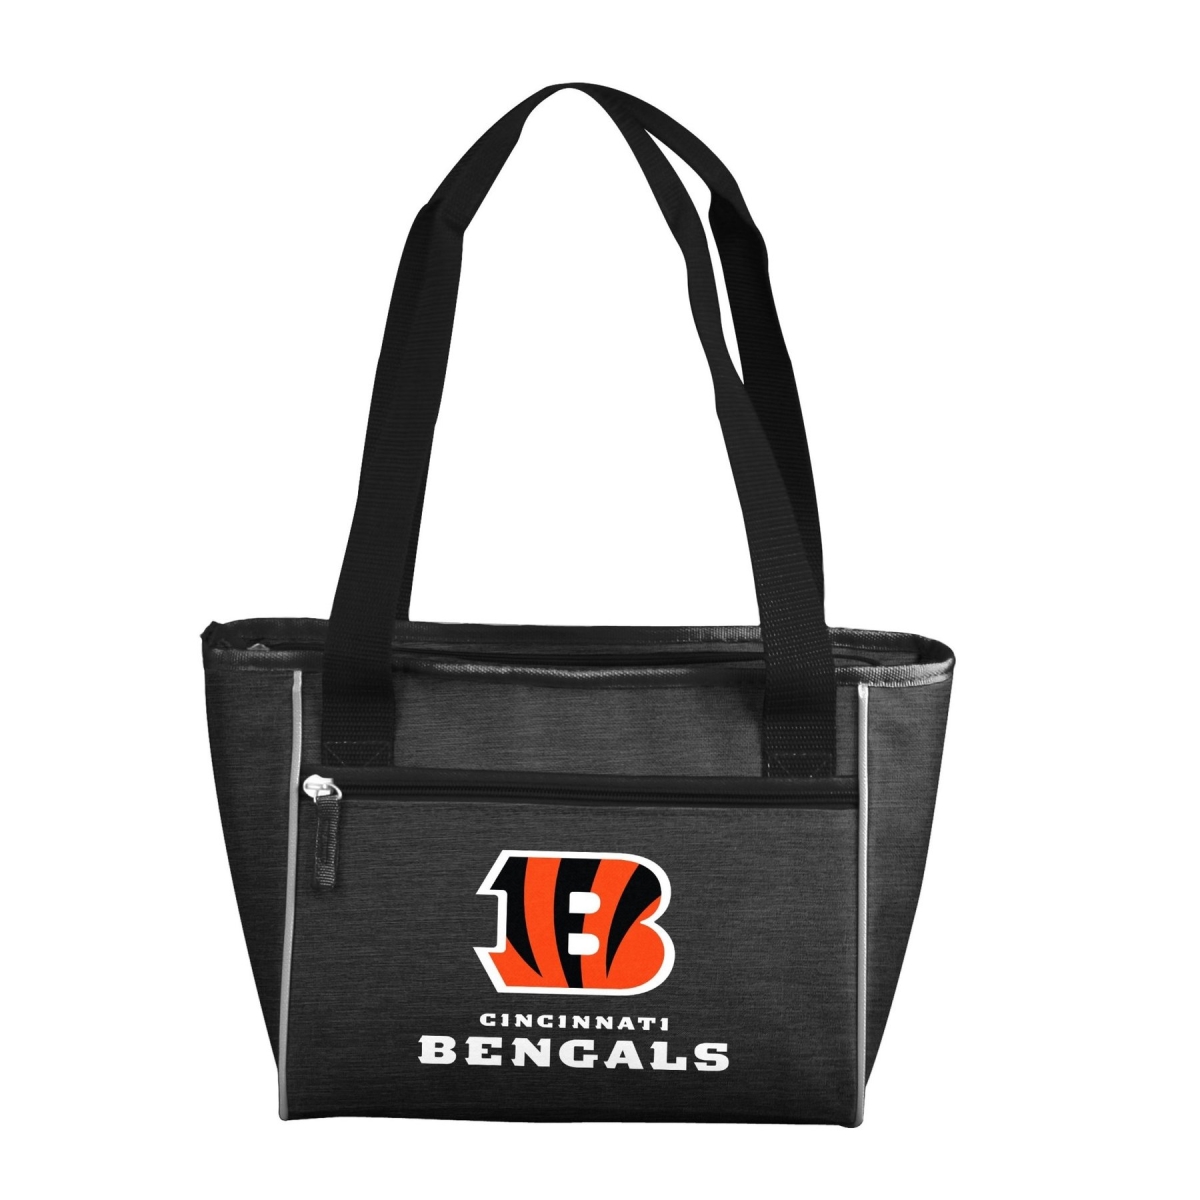 Picture of Logo Chair 607-83-CR1 NFL Cincinnati Bengals Crosshatch Cooler Tote Bag Holds for 16 Cans